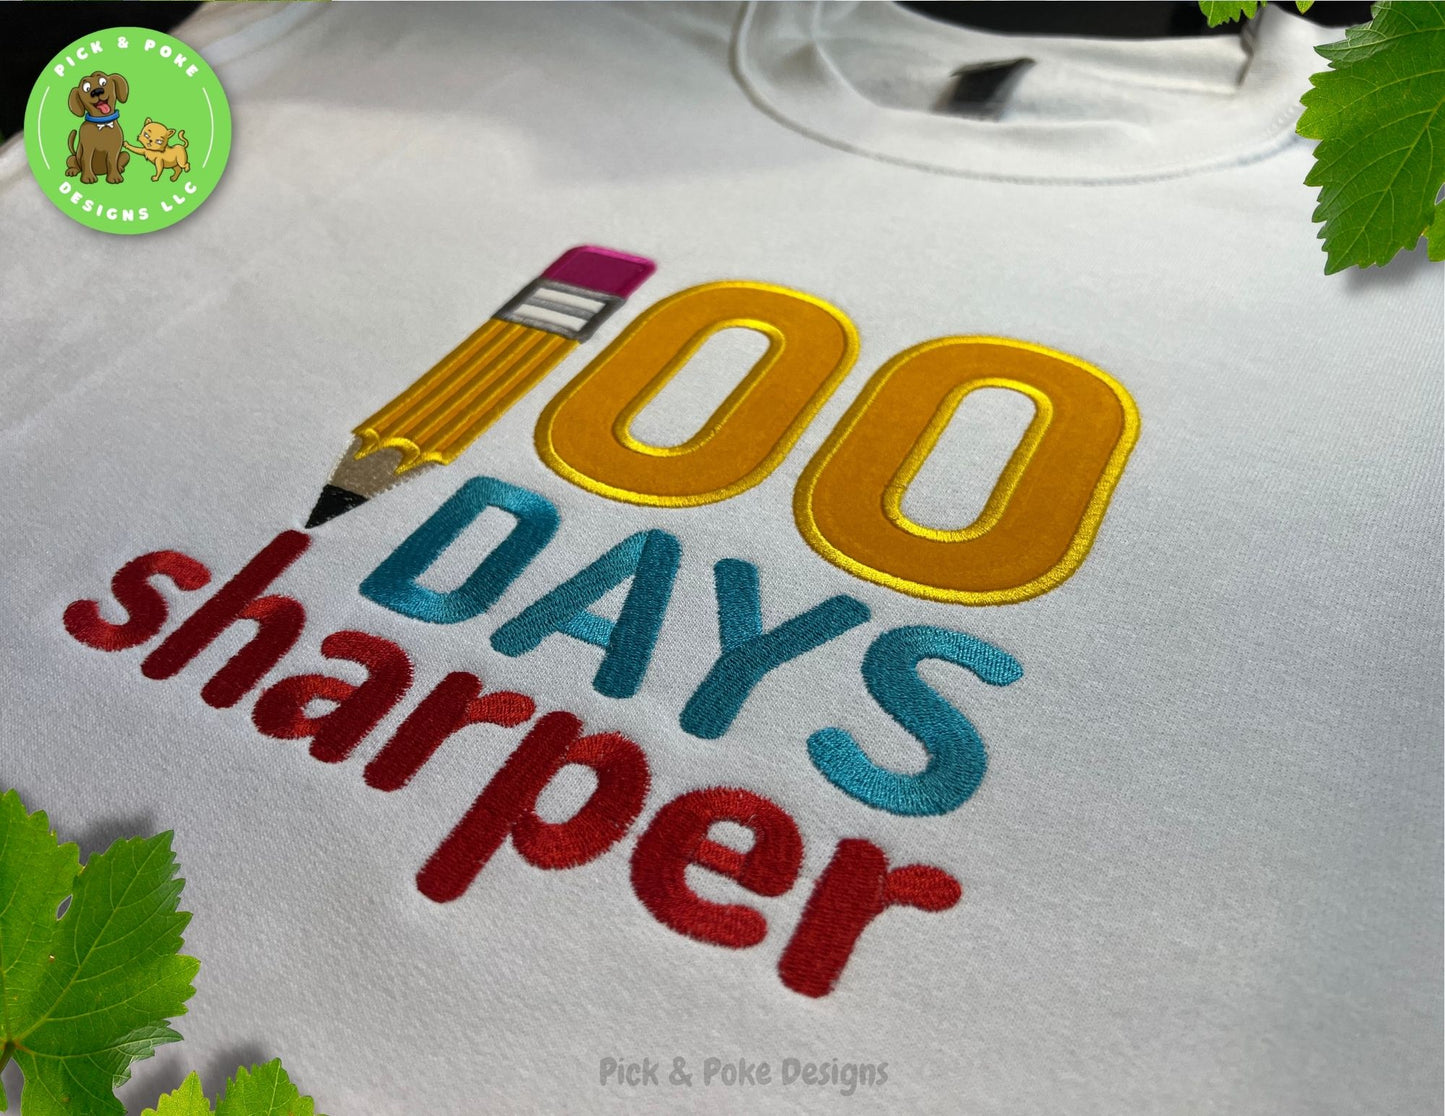 100 Days of Schools sweatshirt features the colors yellow, blue, red, white, and prink